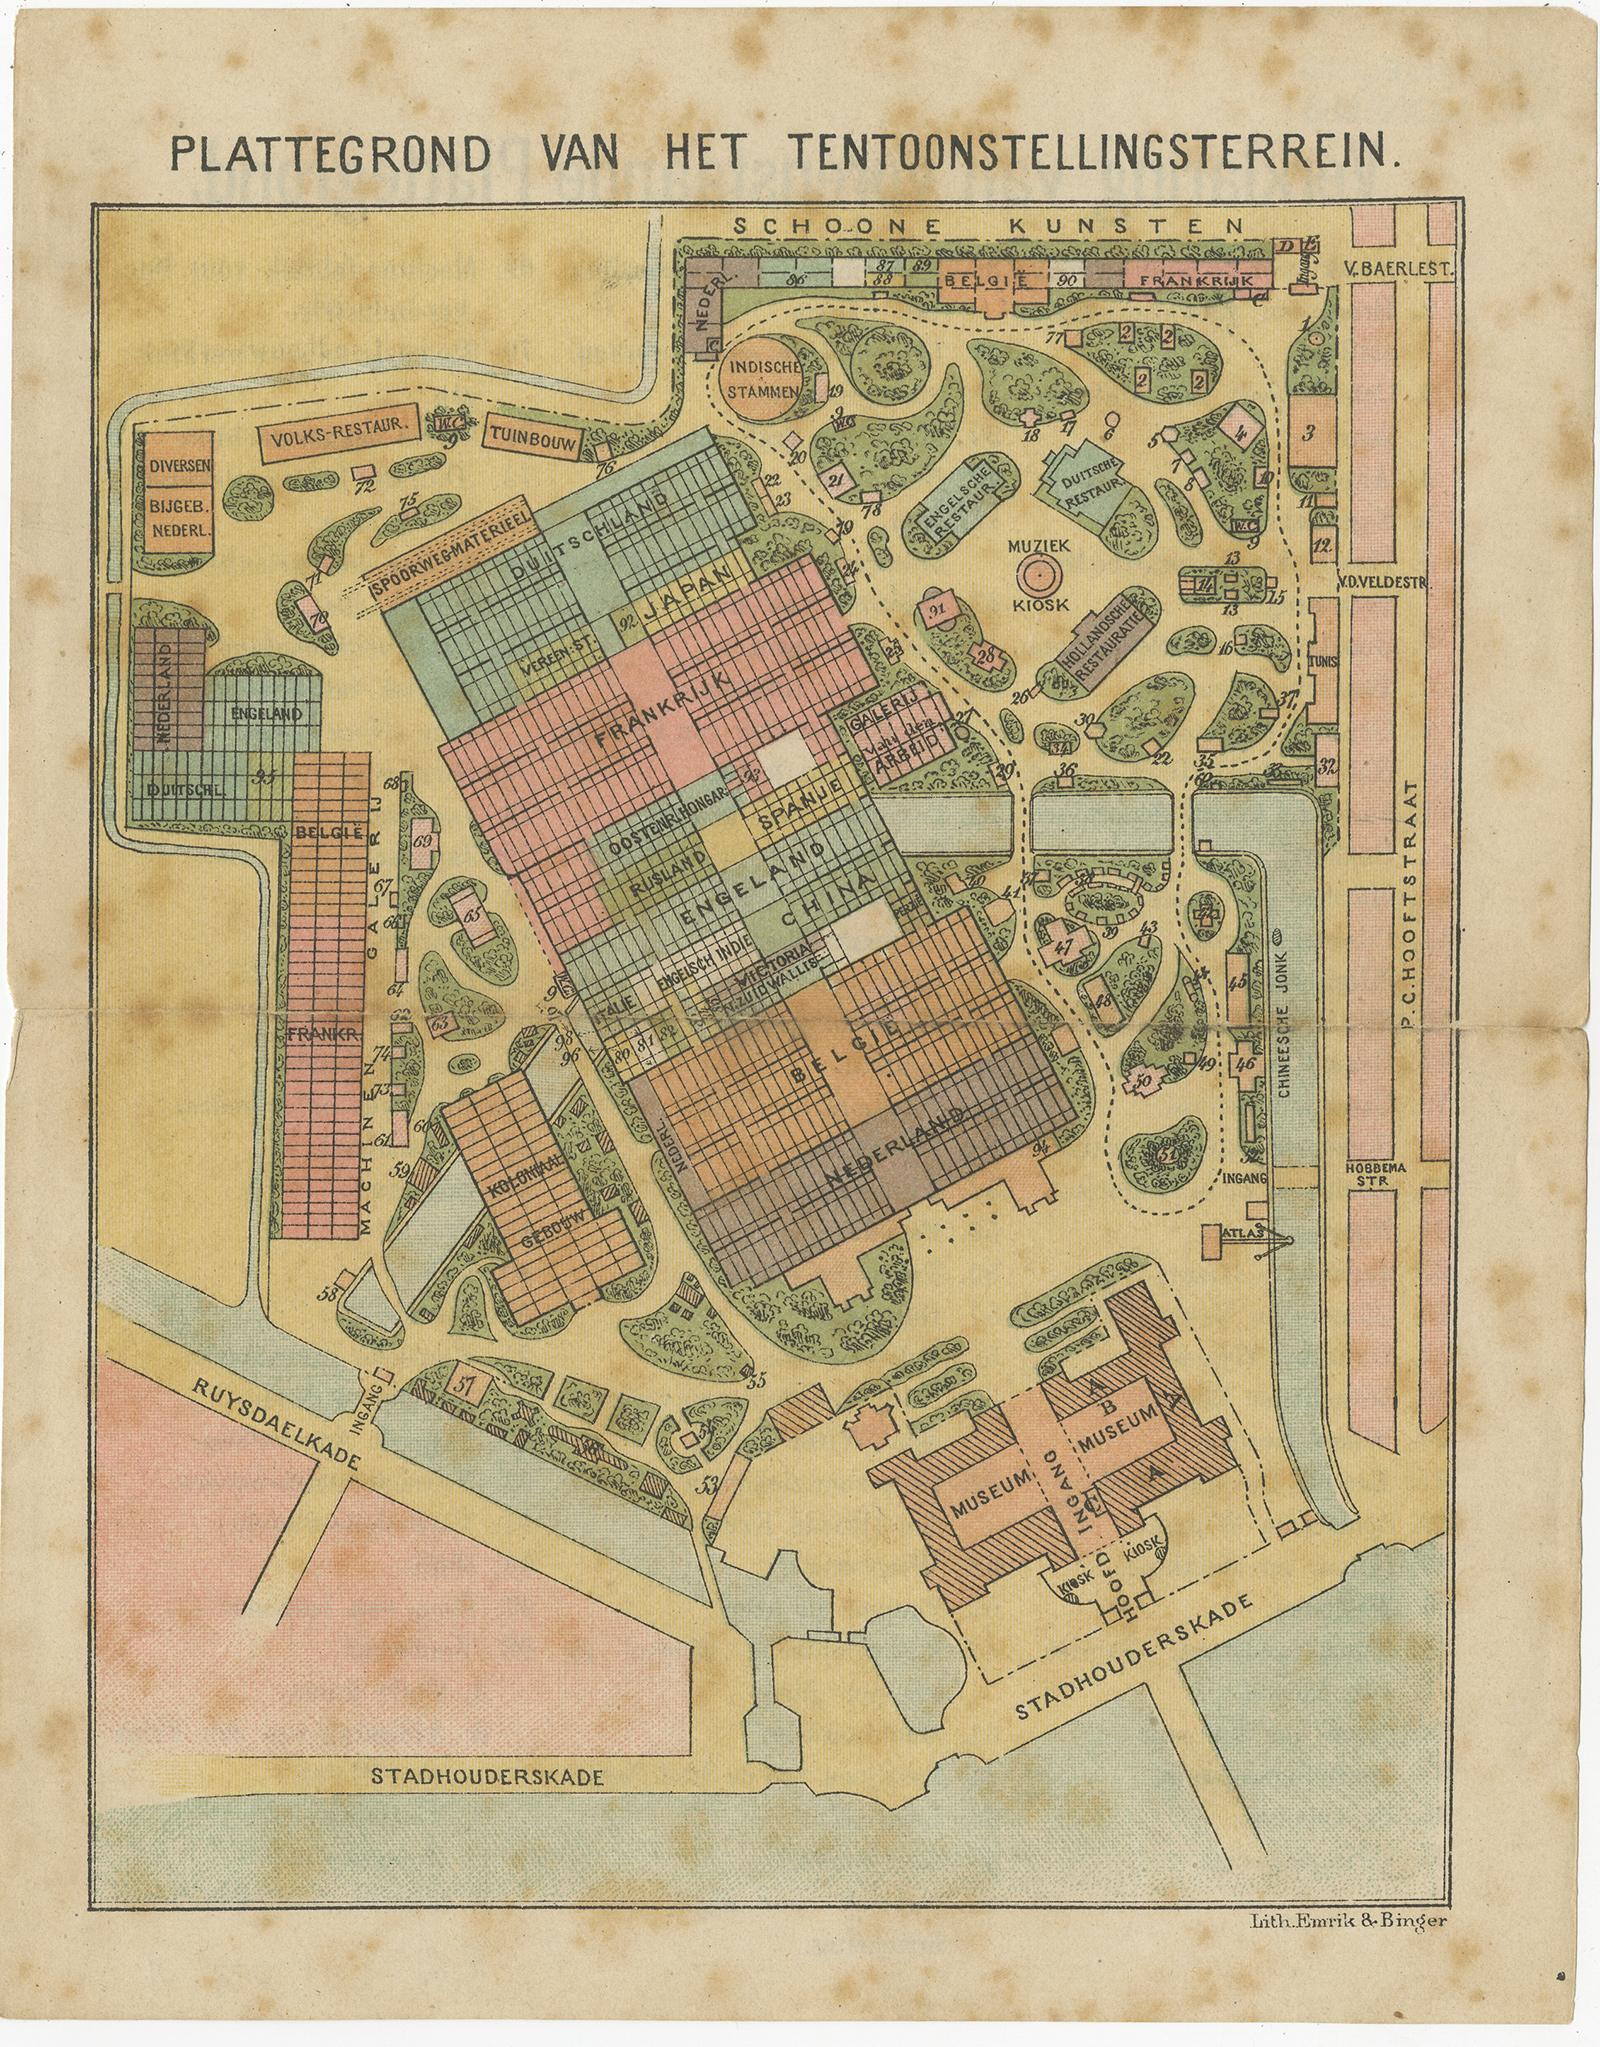 Rare set of 18 prints depicting various (small) views of Amsterdam and Dutch Colonies. It was given to subscribers of 'Nieuws van den Dag' and includes the following prints:

1) Plattegrond van het Tentoonstellingsterrein (double page)
2)